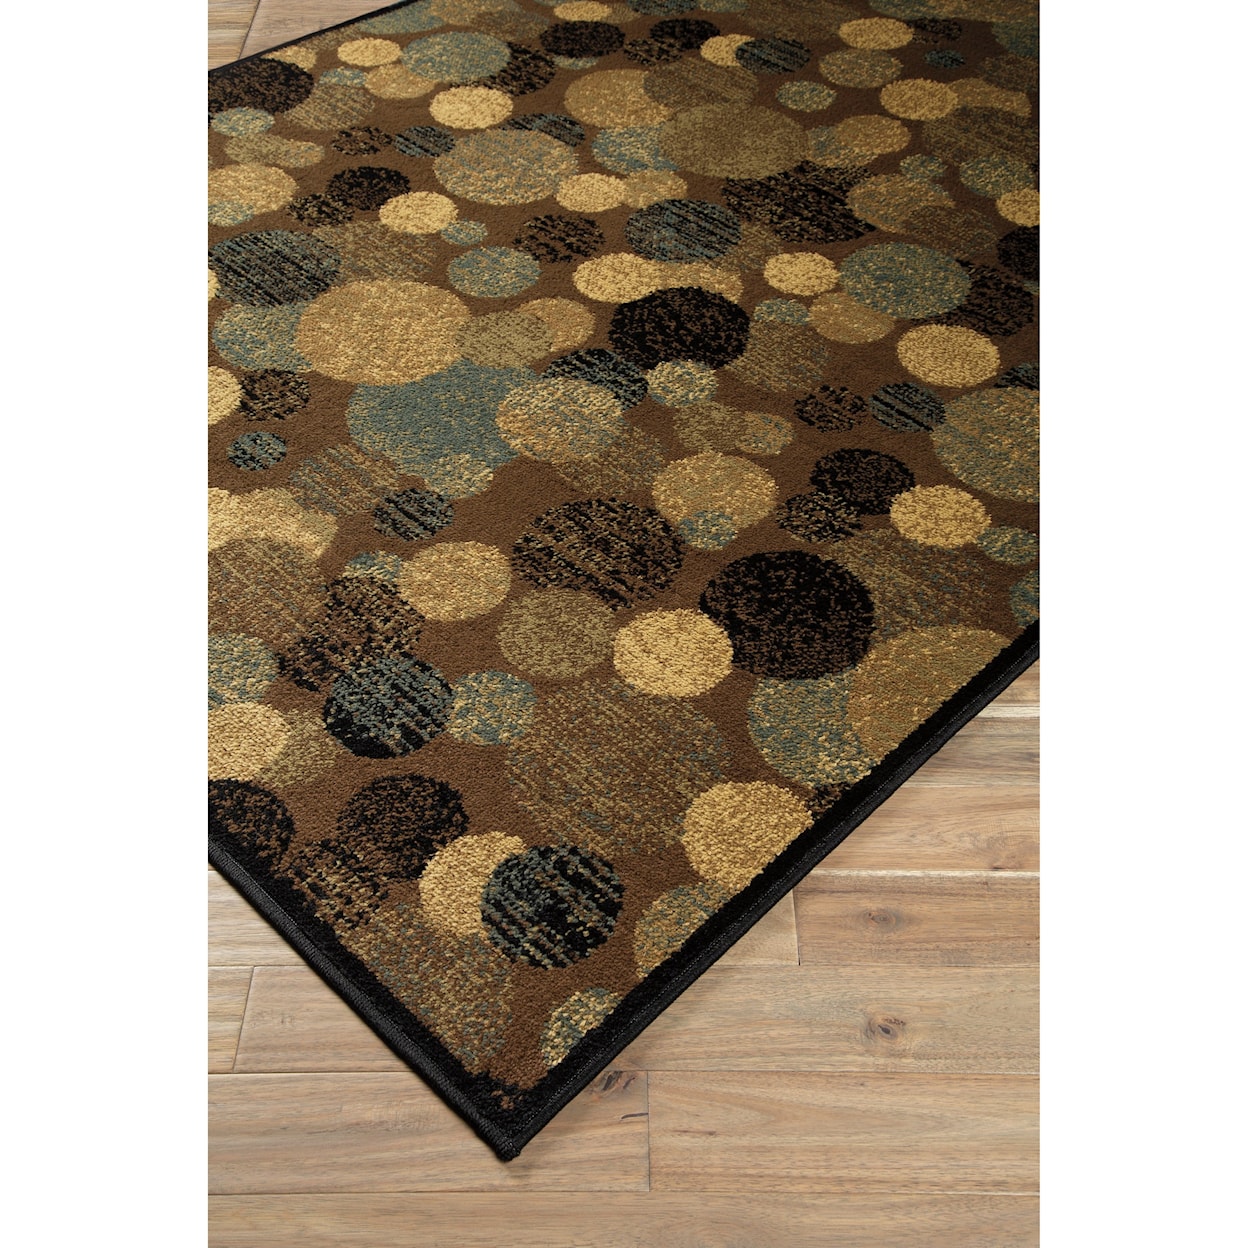 Ashley Furniture Signature Design Contemporary Area Rugs Vance Brown Large Rug